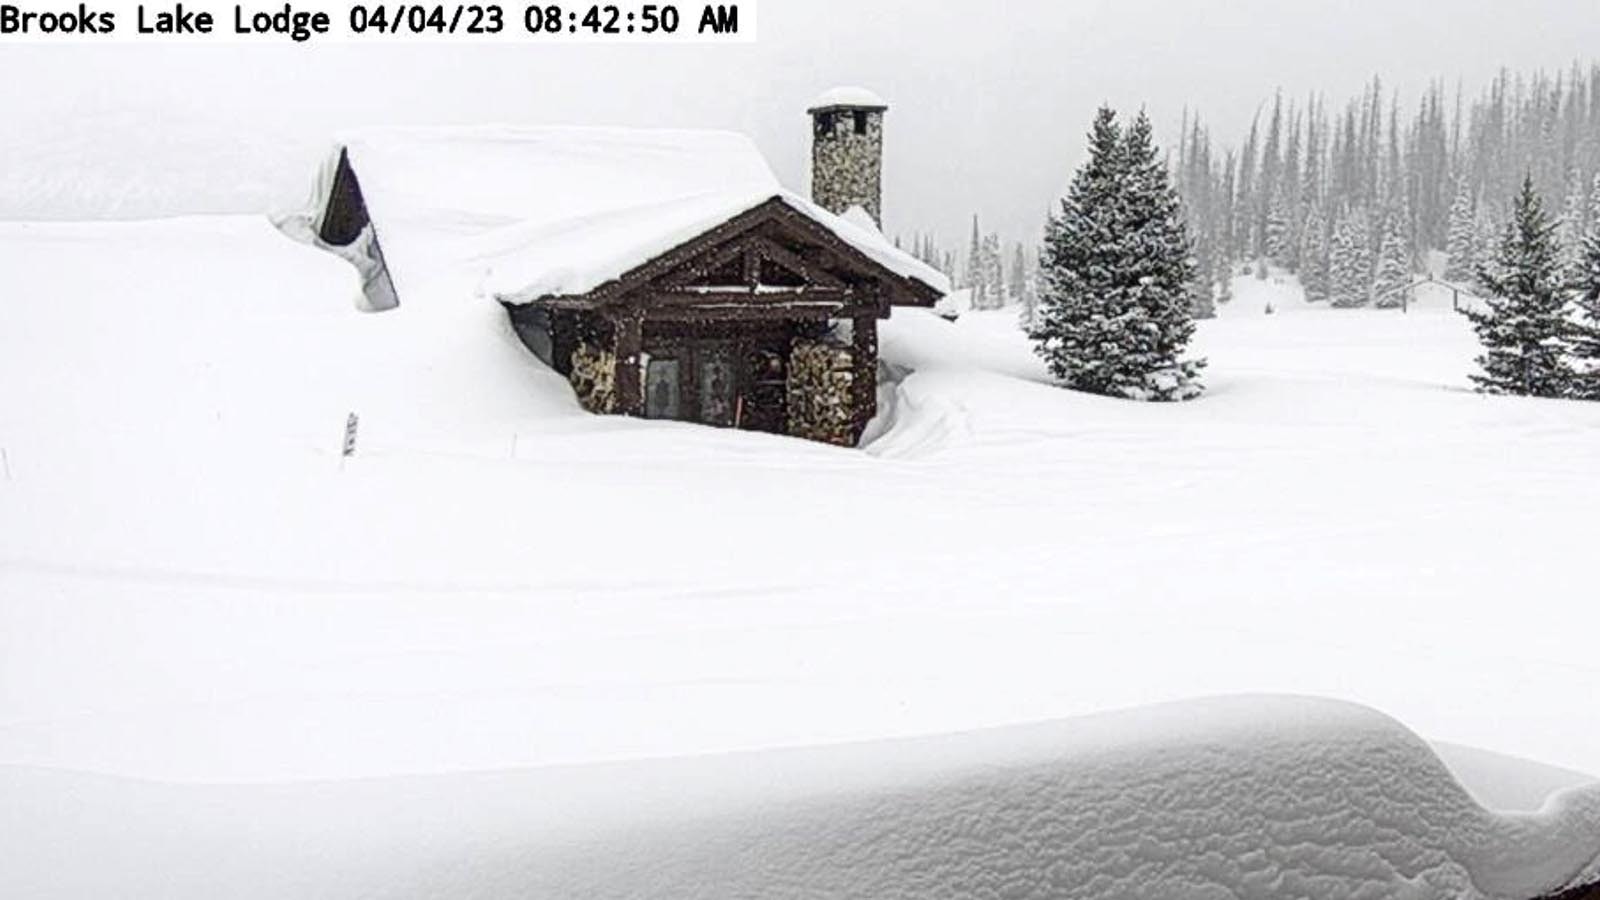 A 24/7 webcam at the Brooks Lake Lodge website gives anyone from anywhere a view the place and how little — or how much — snow it has.